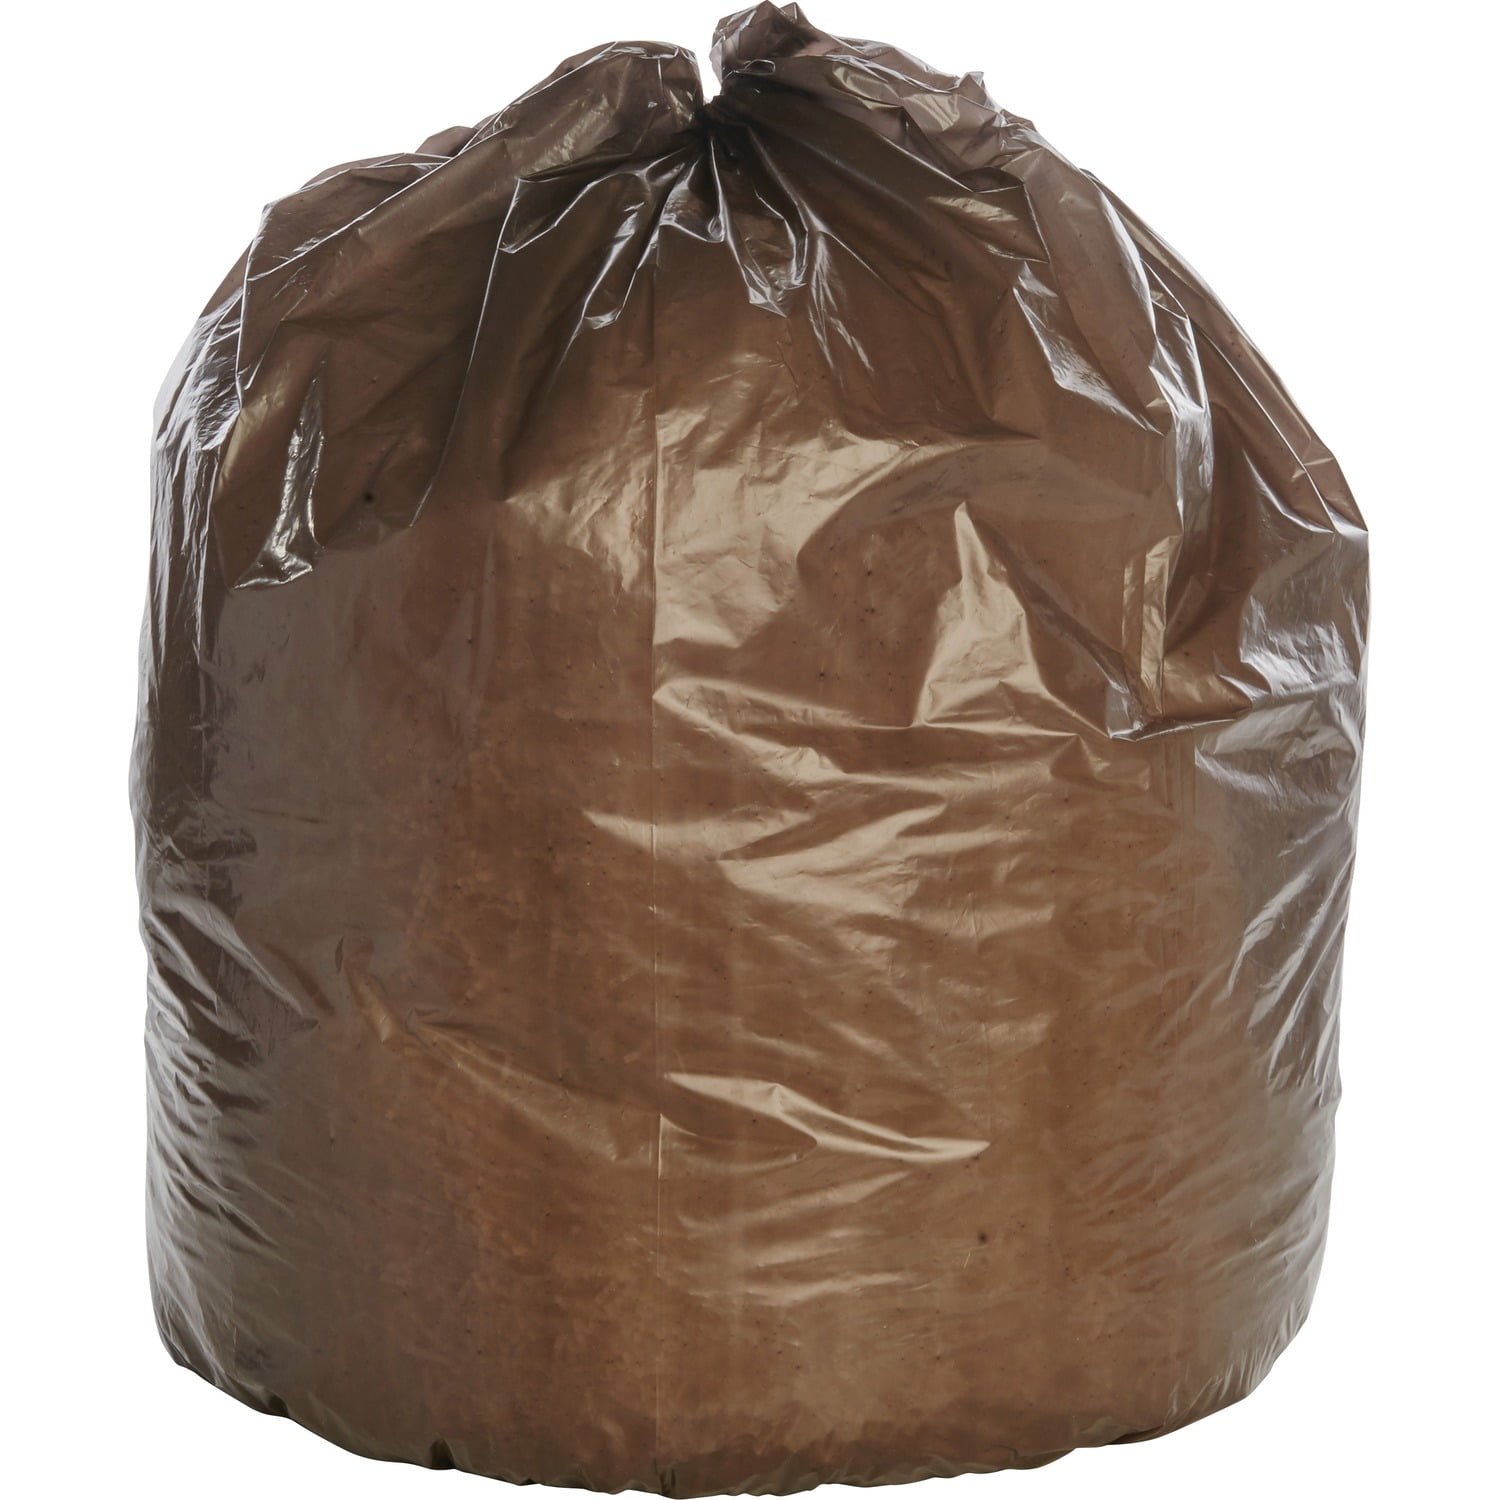 Trash Bags, NSN 8105-01-284-2924, 36x18x12-inch, 30-gallon, Single-Wall  Paper, 50lb strength (50-pack) - The ArmyProperty Store